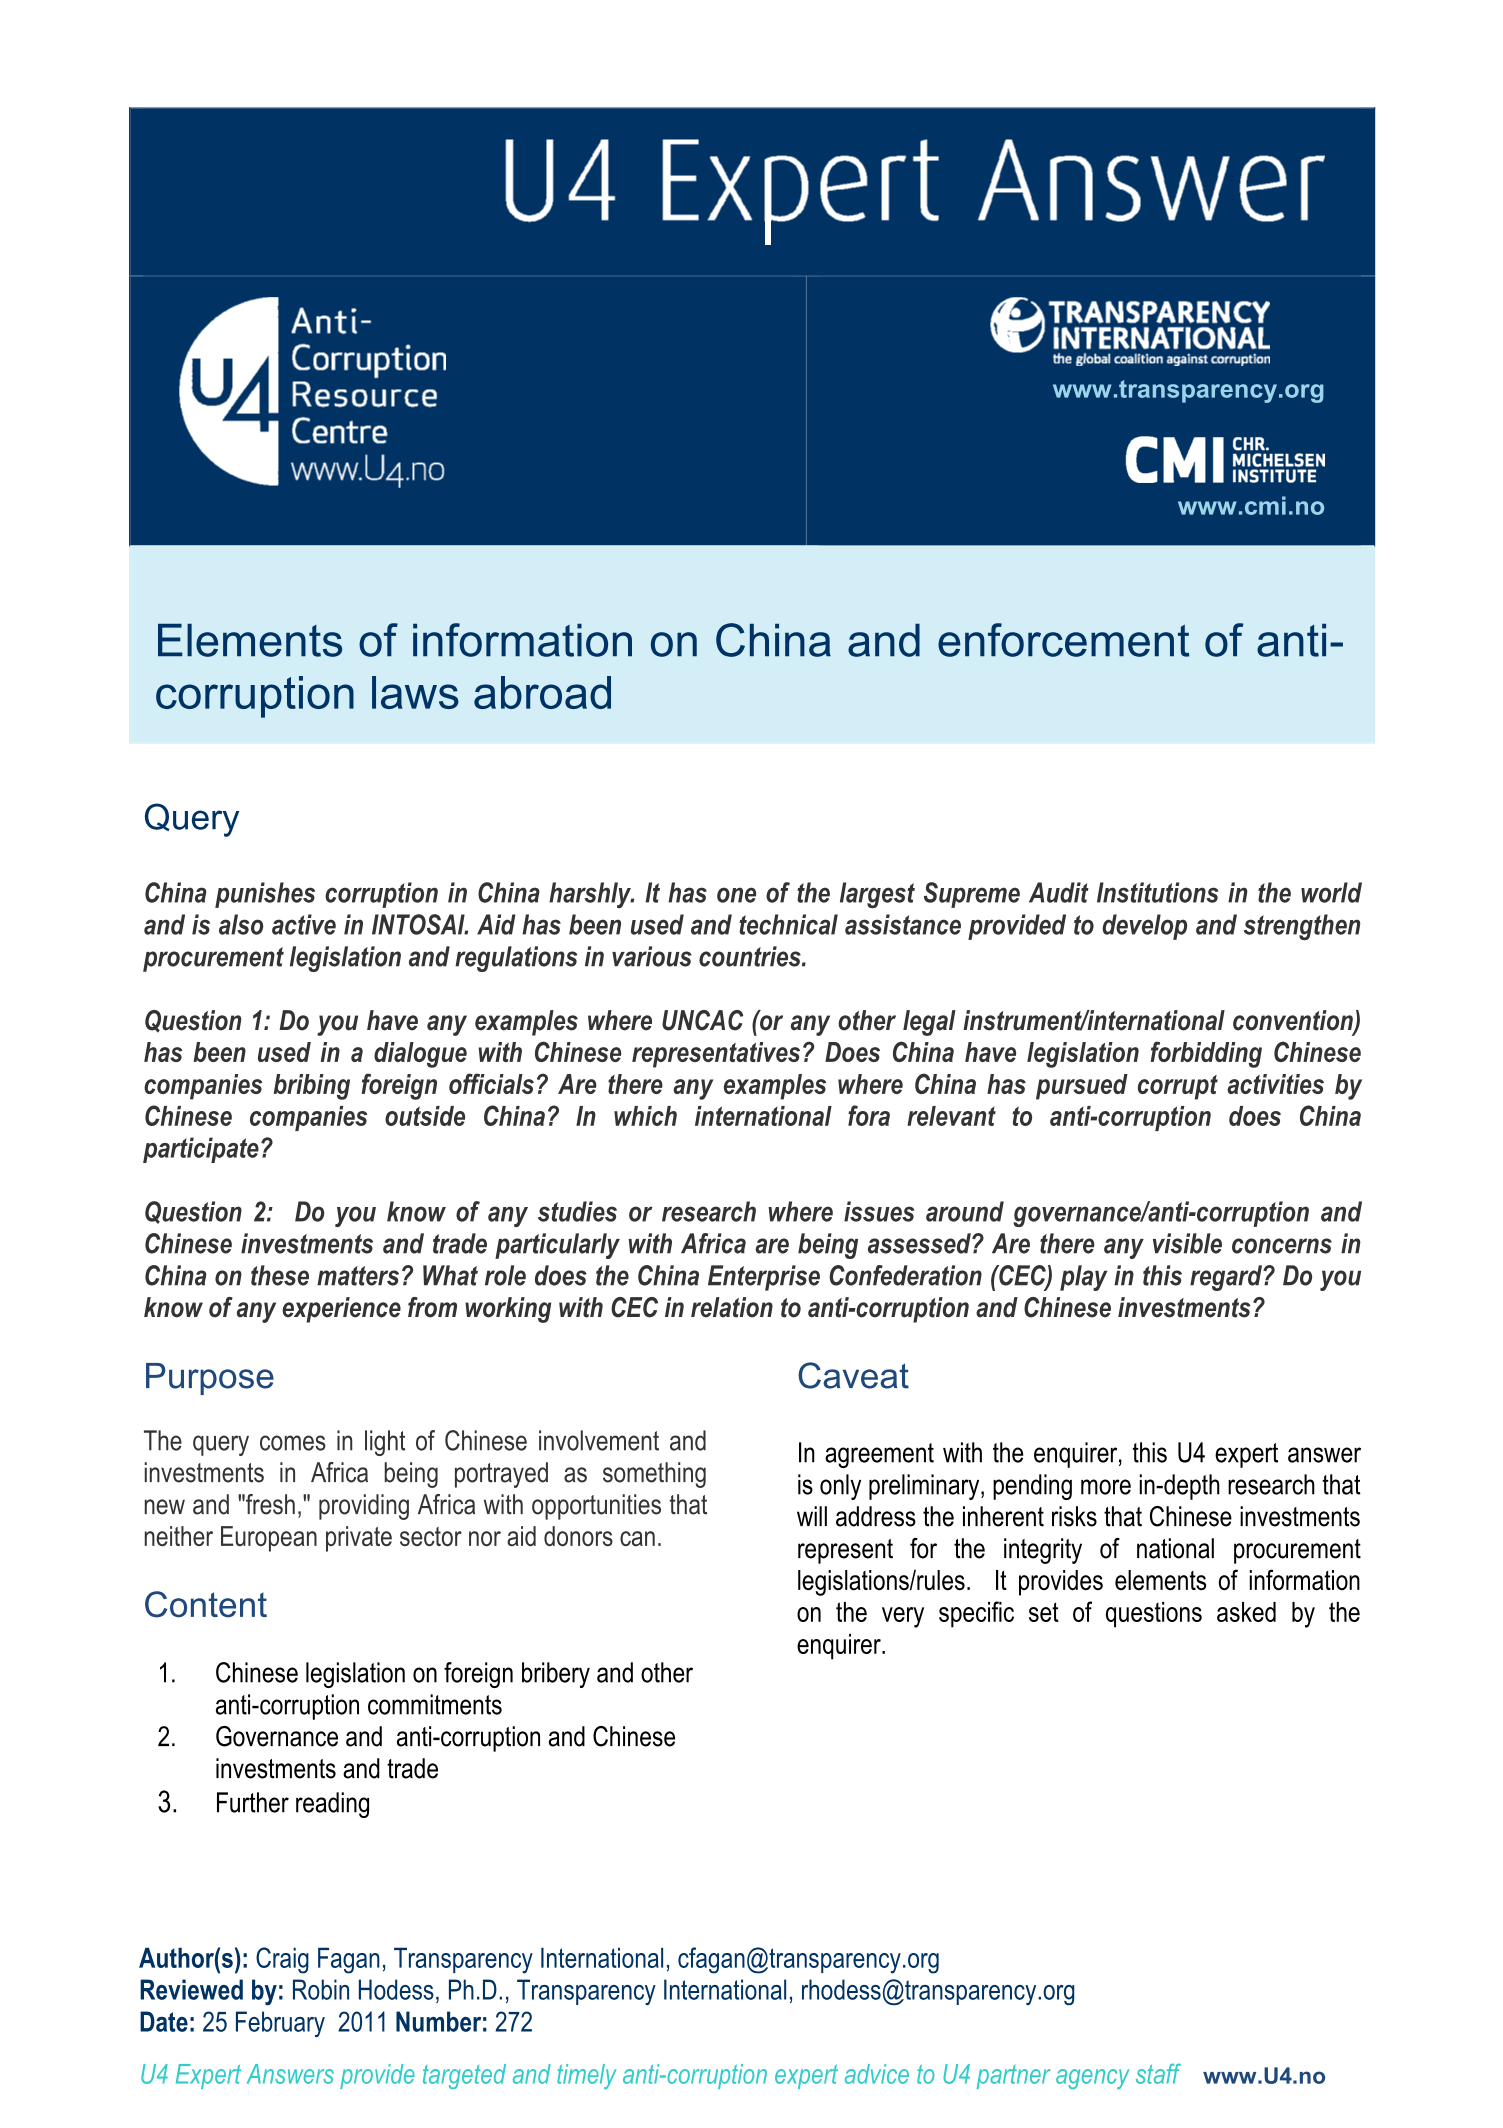 Elements of information on China and enforcement of anti-corruption laws abroad